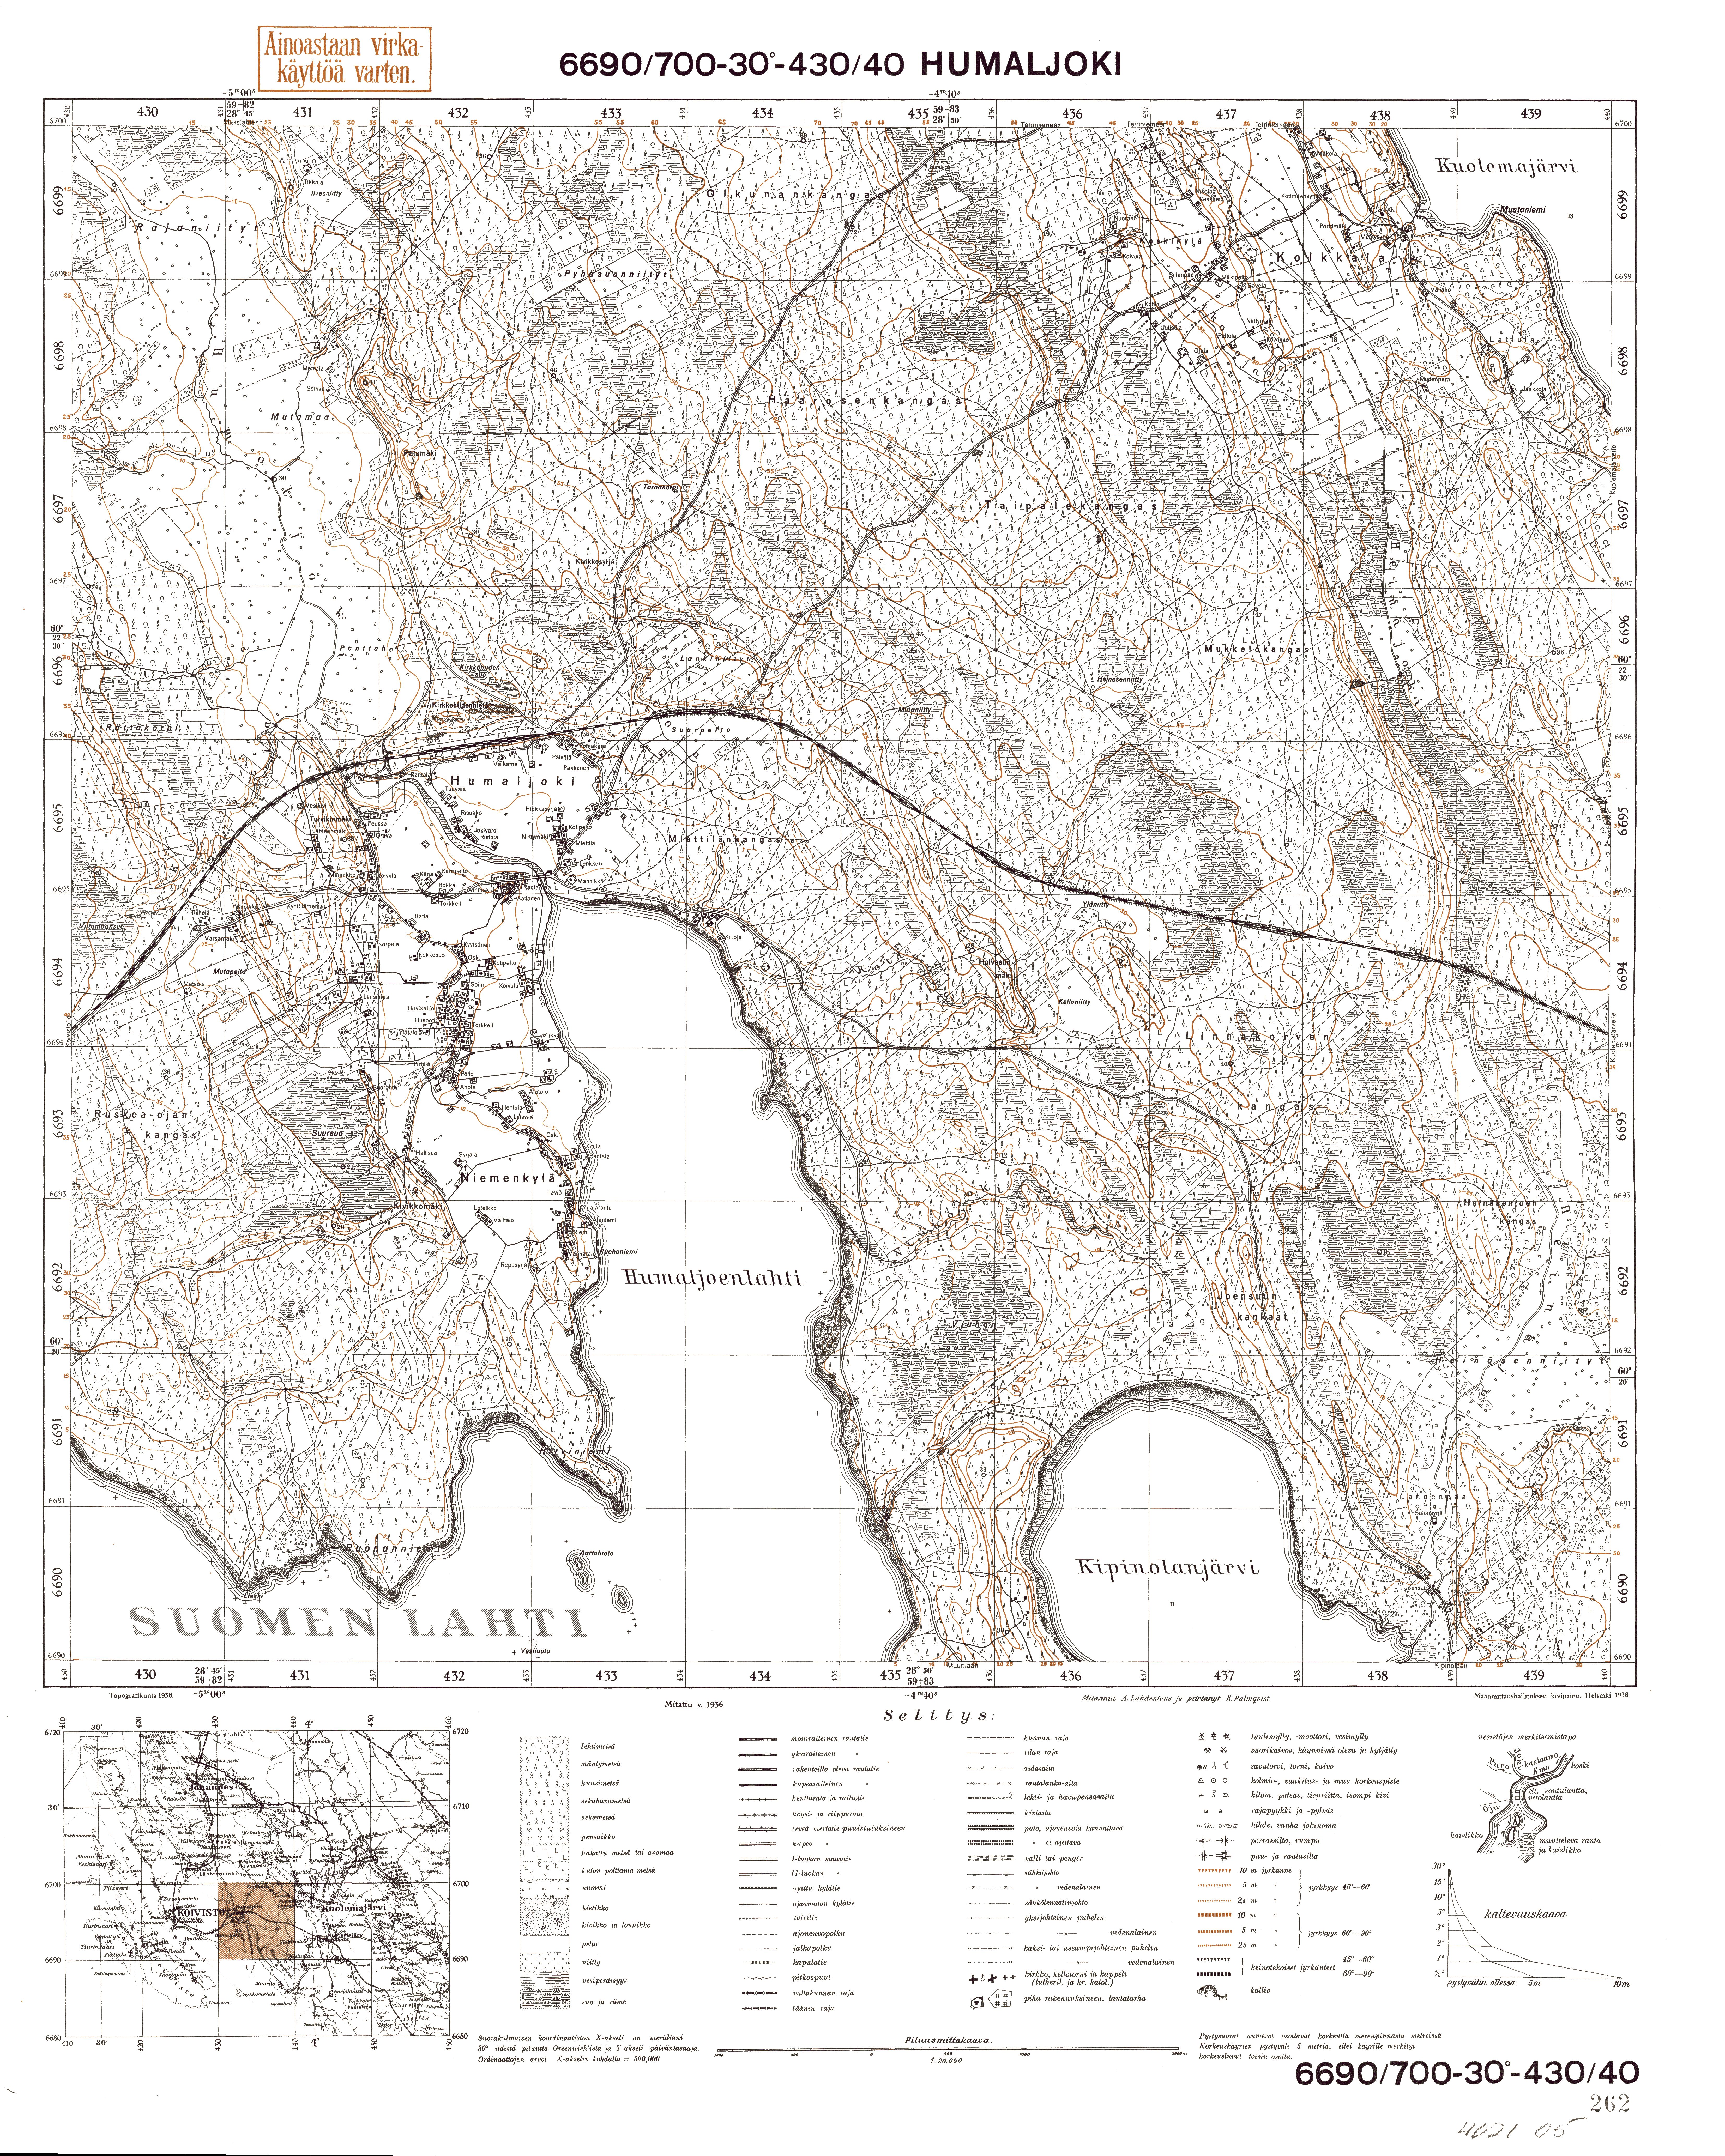 Jermilovo. Humaljoki. Topografikartta 402105. Topographic map from 1937. Use the zooming tool to explore in higher level of detail. Obtain as a quality print or high resolution image